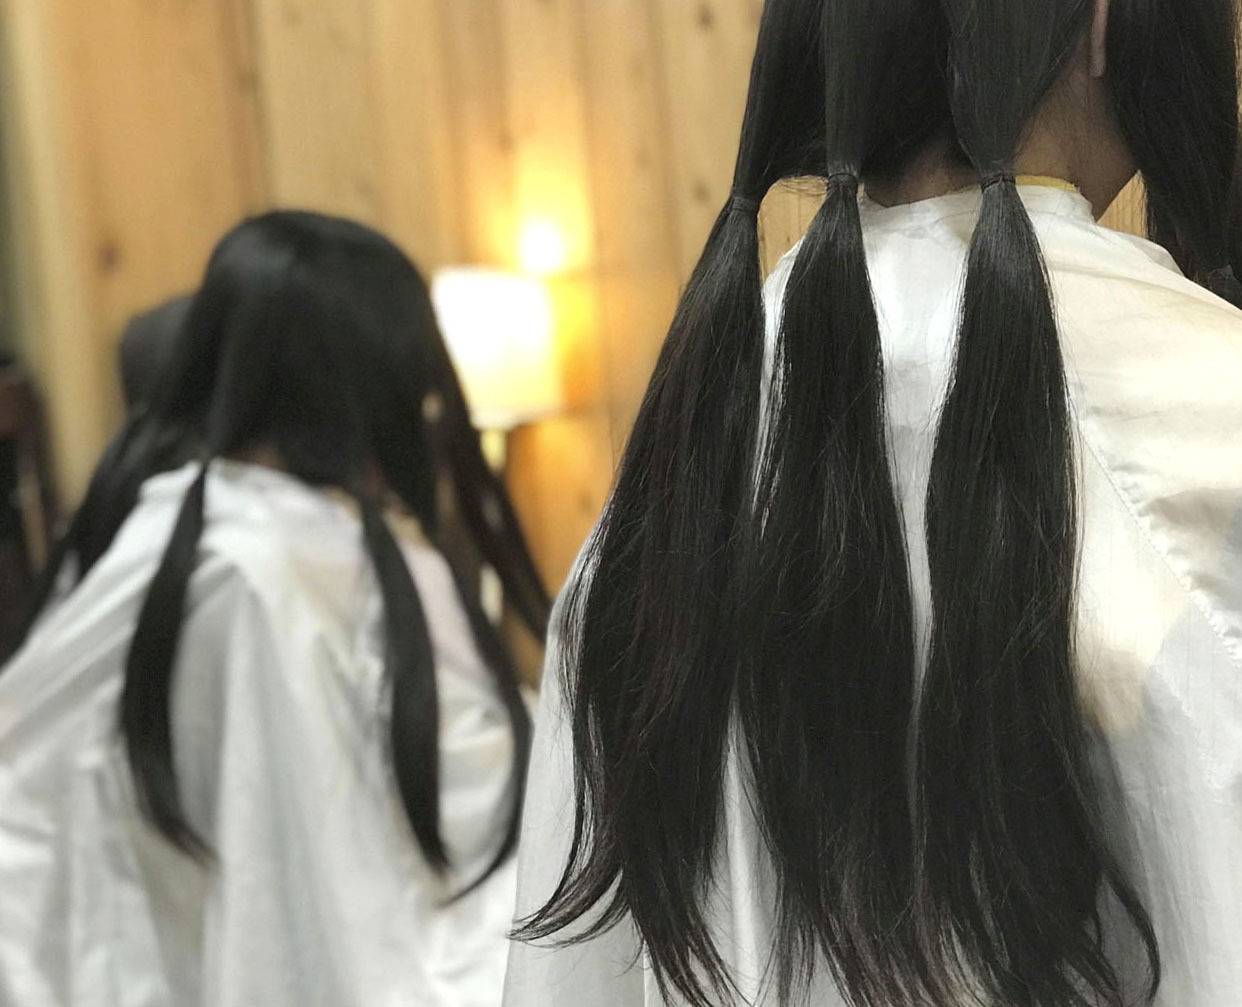 Hair donations booming in Japan but know-how still lacking | The Japan Times